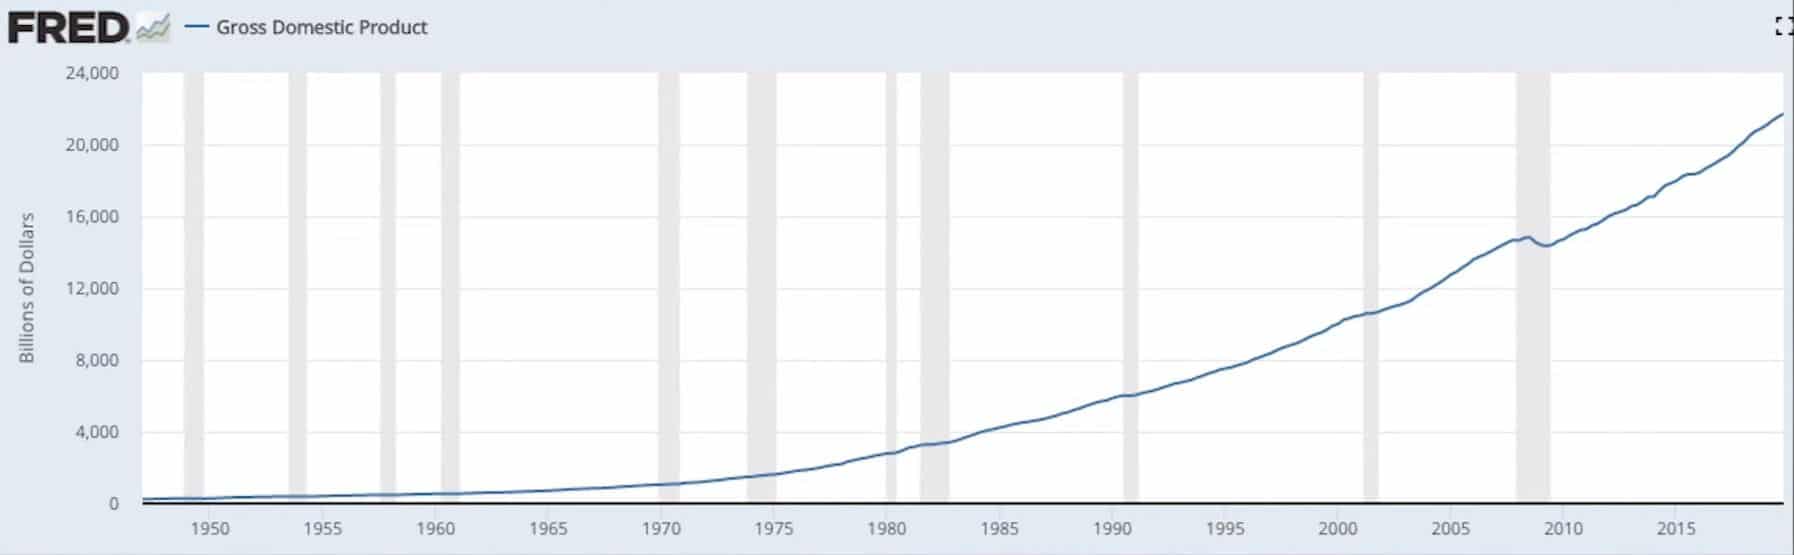 chart goes back to 1950, notice the GDP along with the debt